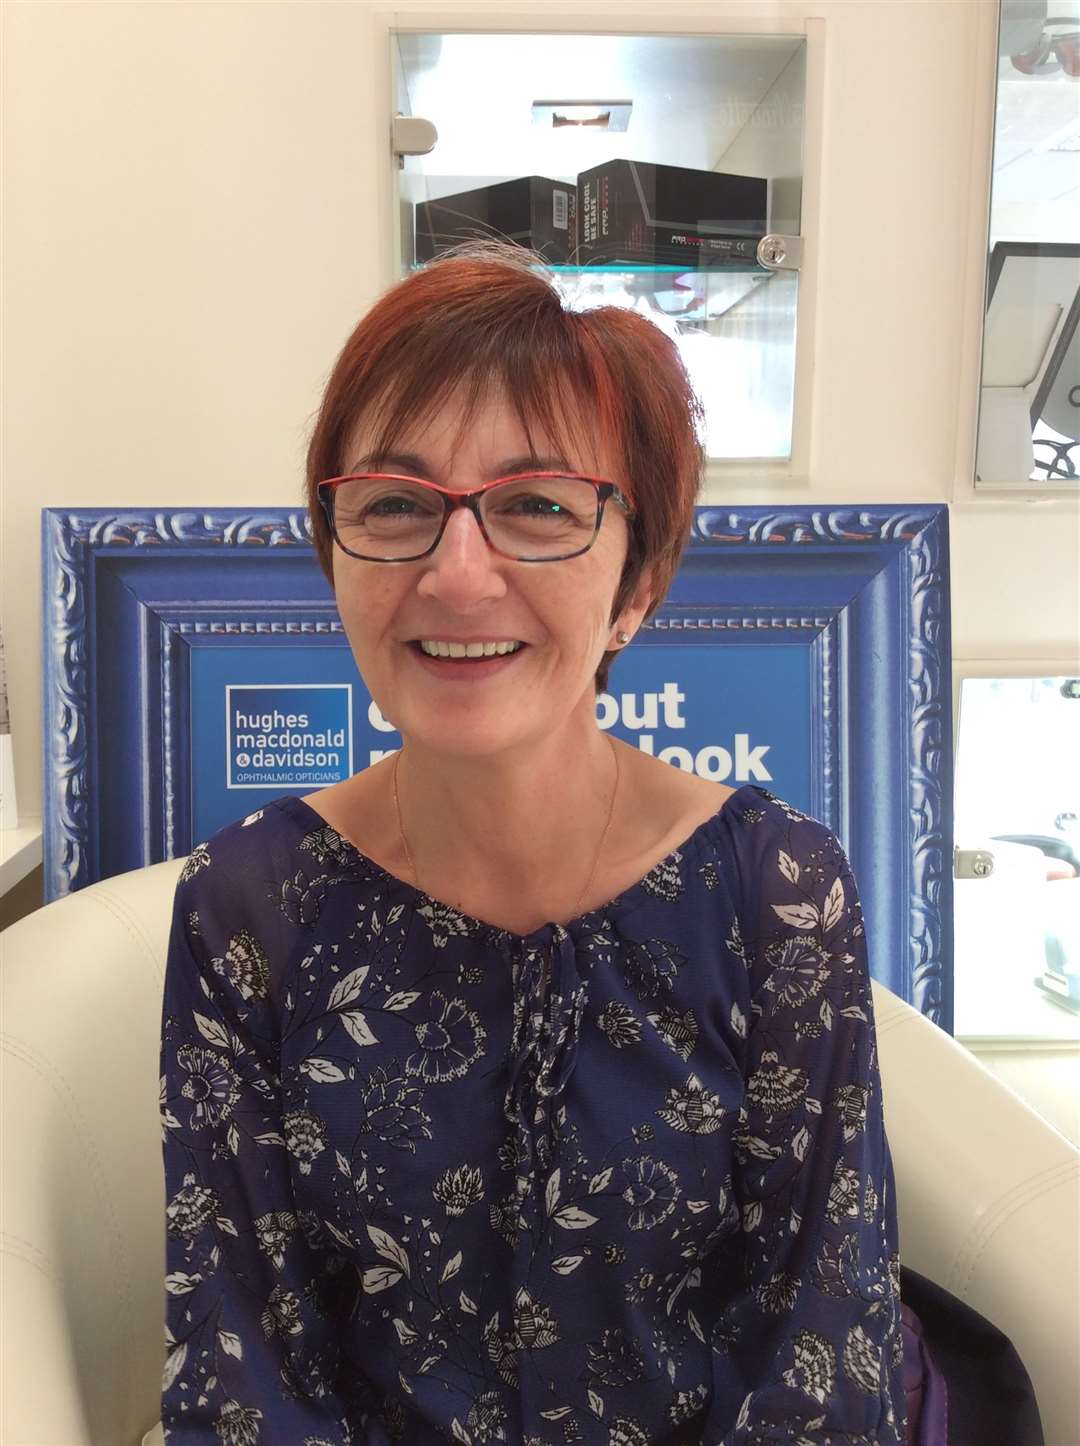 Margaret Bruce is retiring after 32 years with Hughes, Macdonald and Davidson opticians in Inverurie.